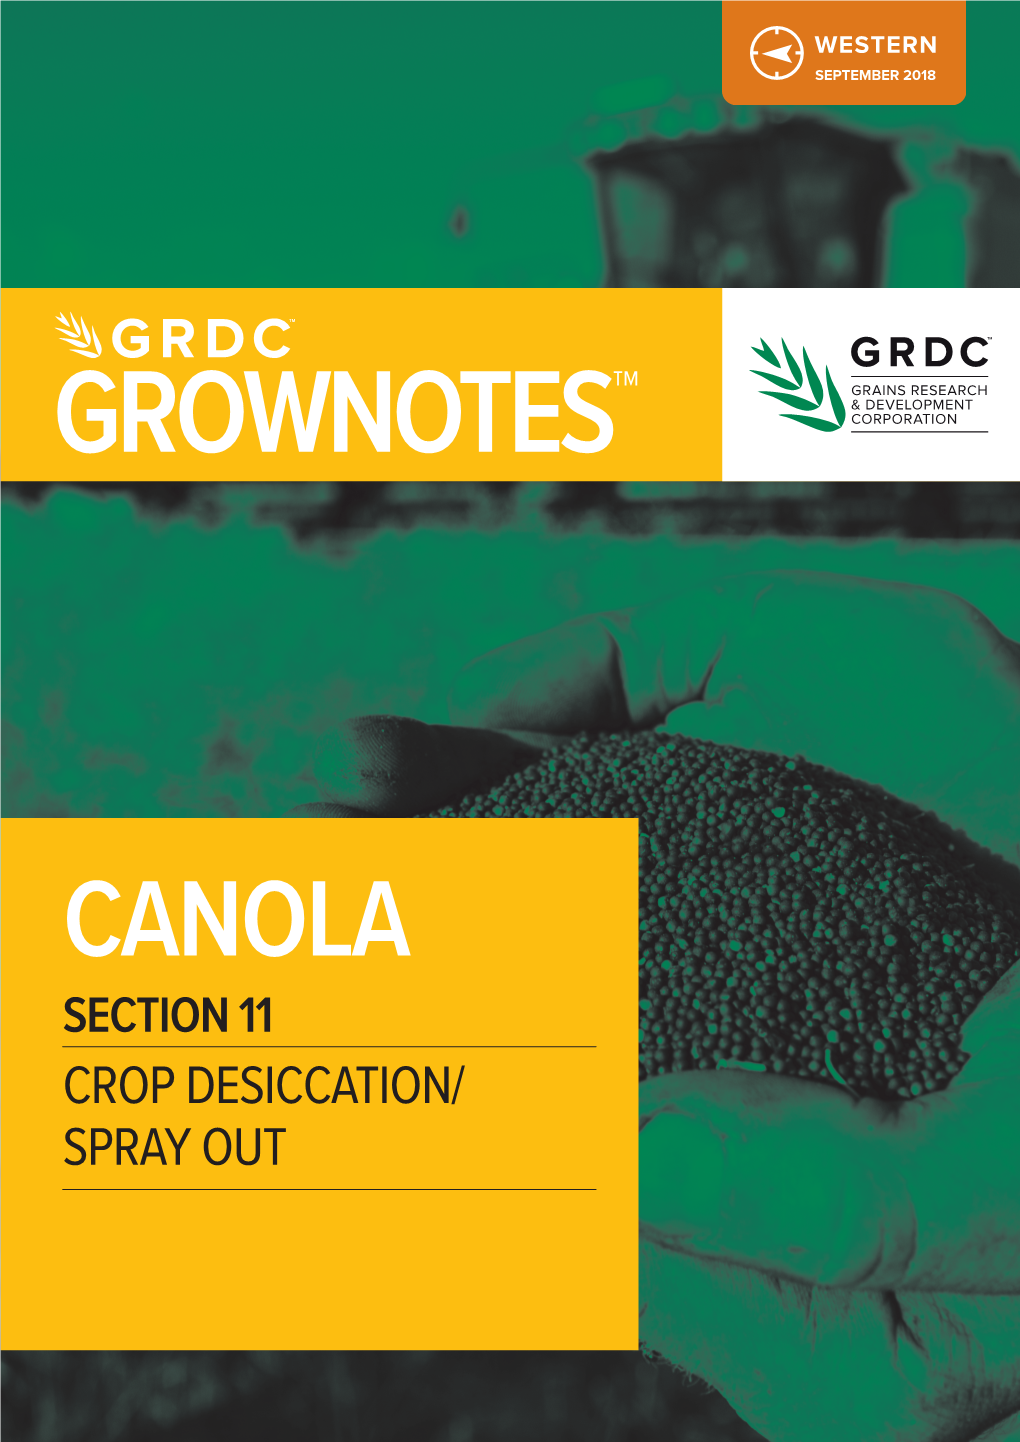 CANOLA SECTION 11 CROP DESICCATION/ SPRAY out Table of Contents Section 11 Canola - Crop Desiccation/Spray out Feedback